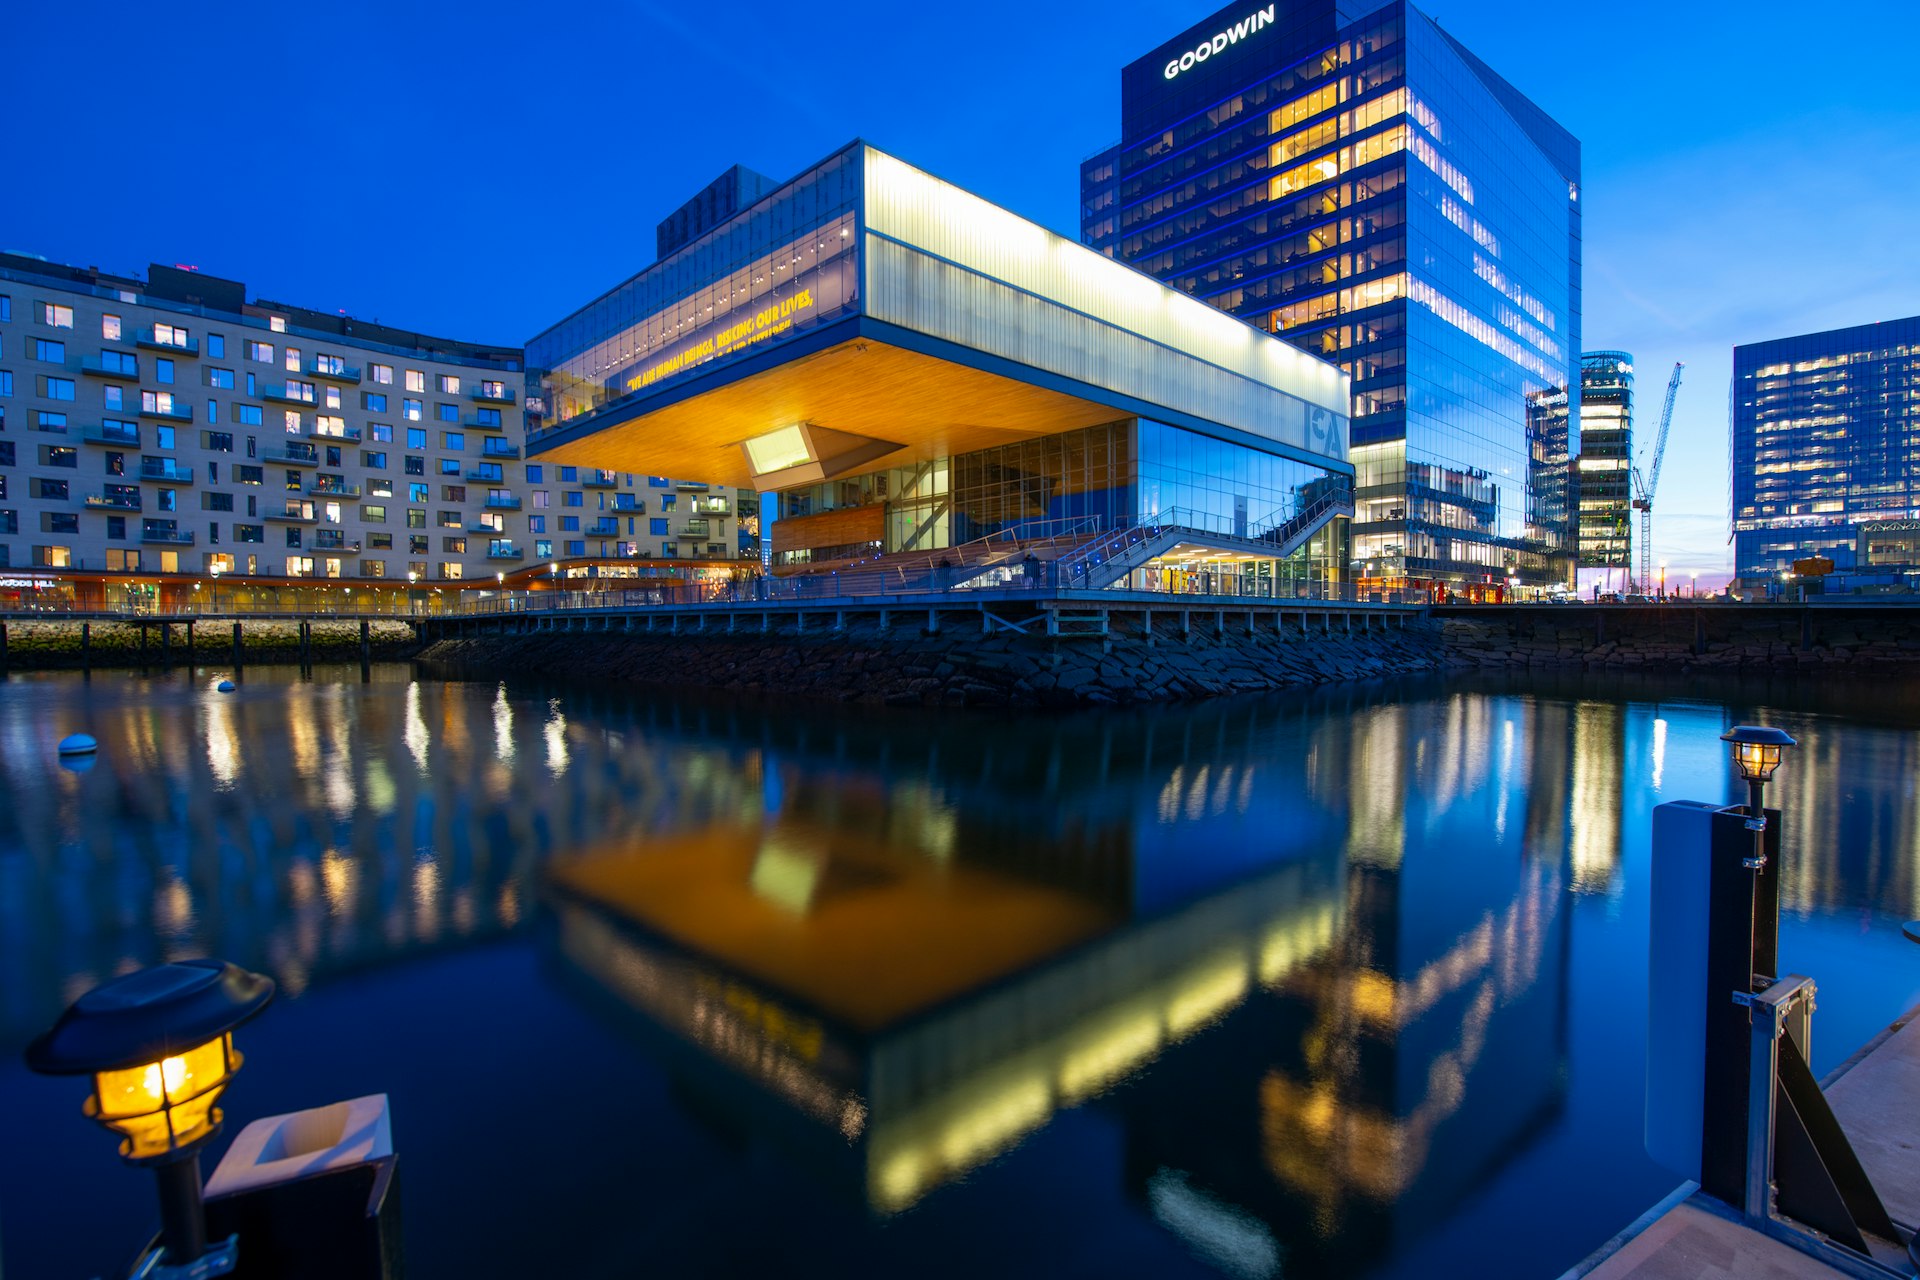 The Institute of Contemporary Art at dusk, Seaport District, Boston, Massachusetts, USA